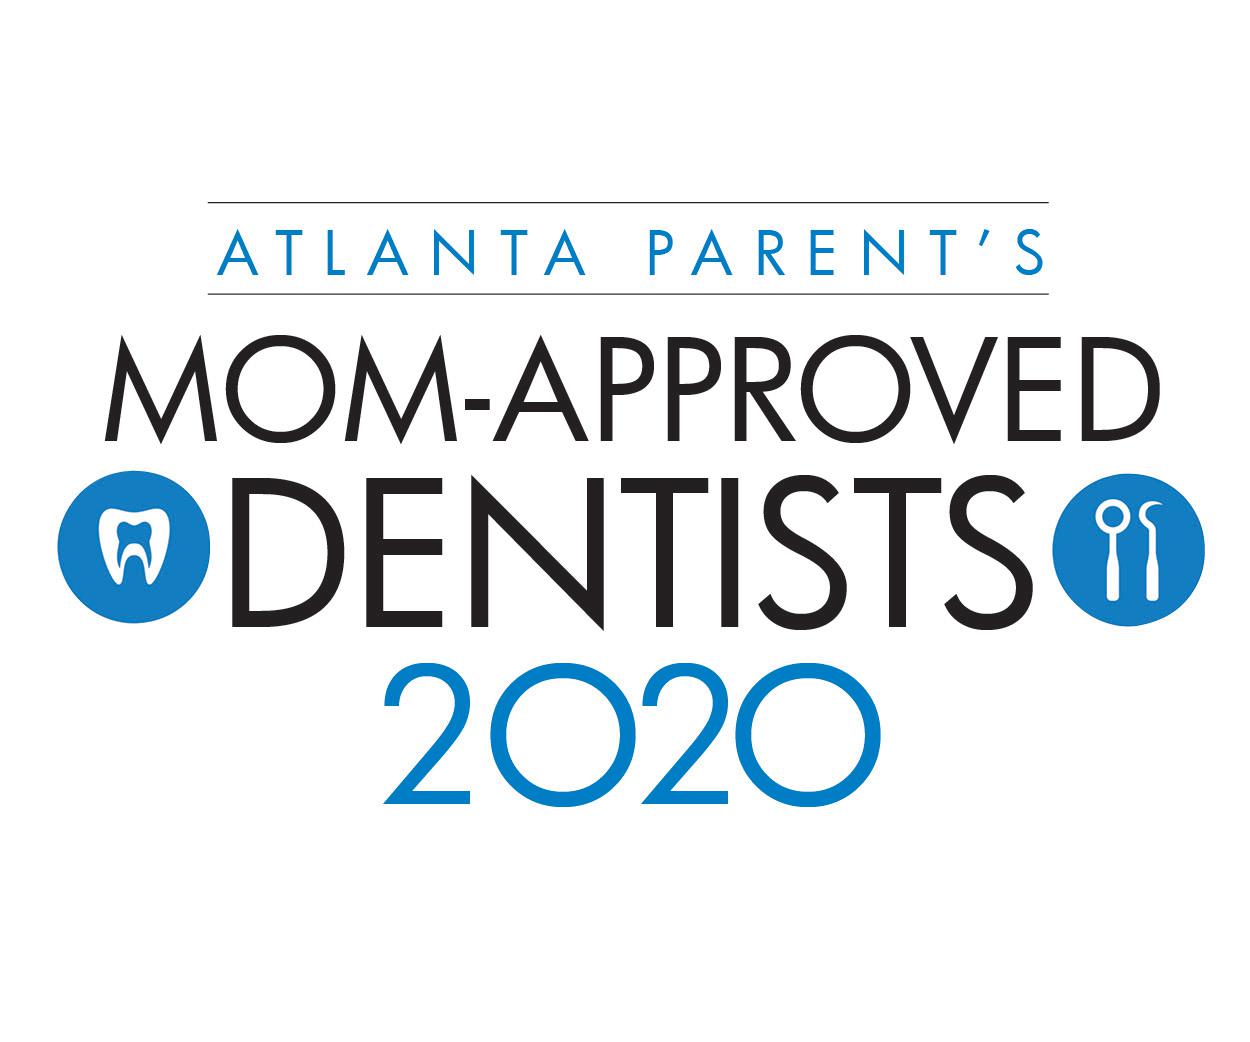 Dentistry for Children - Roswell - Roswell, GA 30075 - (770)692-1000 | ShowMeLocal.com